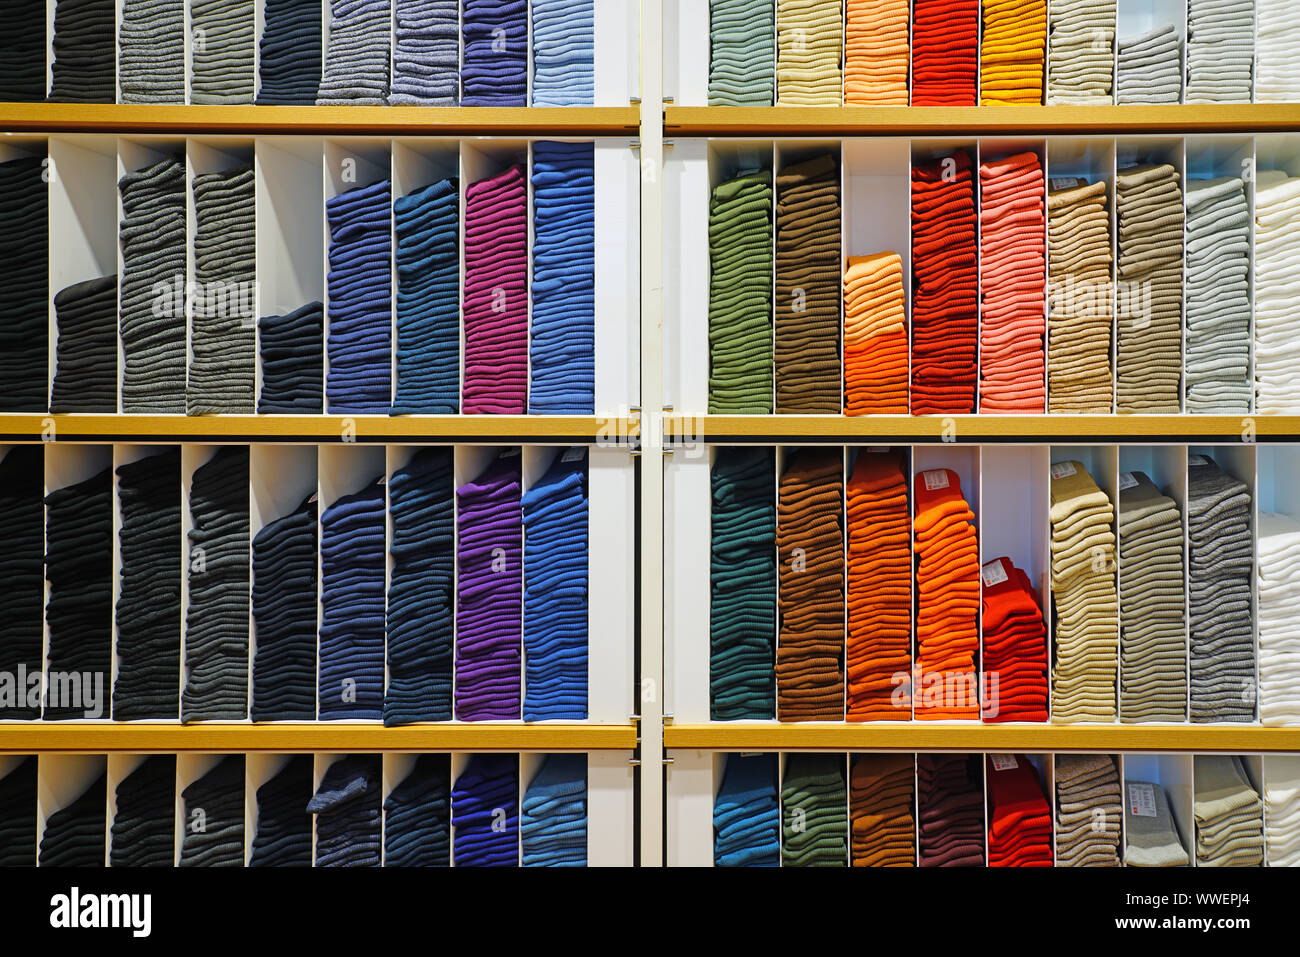 RENNES, FRANCE -23 JUL 2019- Display of colorful socks in a Uniqlo store in  Rennes, France. Uniqlo is a Japanese clothes retailer Stock Photo - Alamy